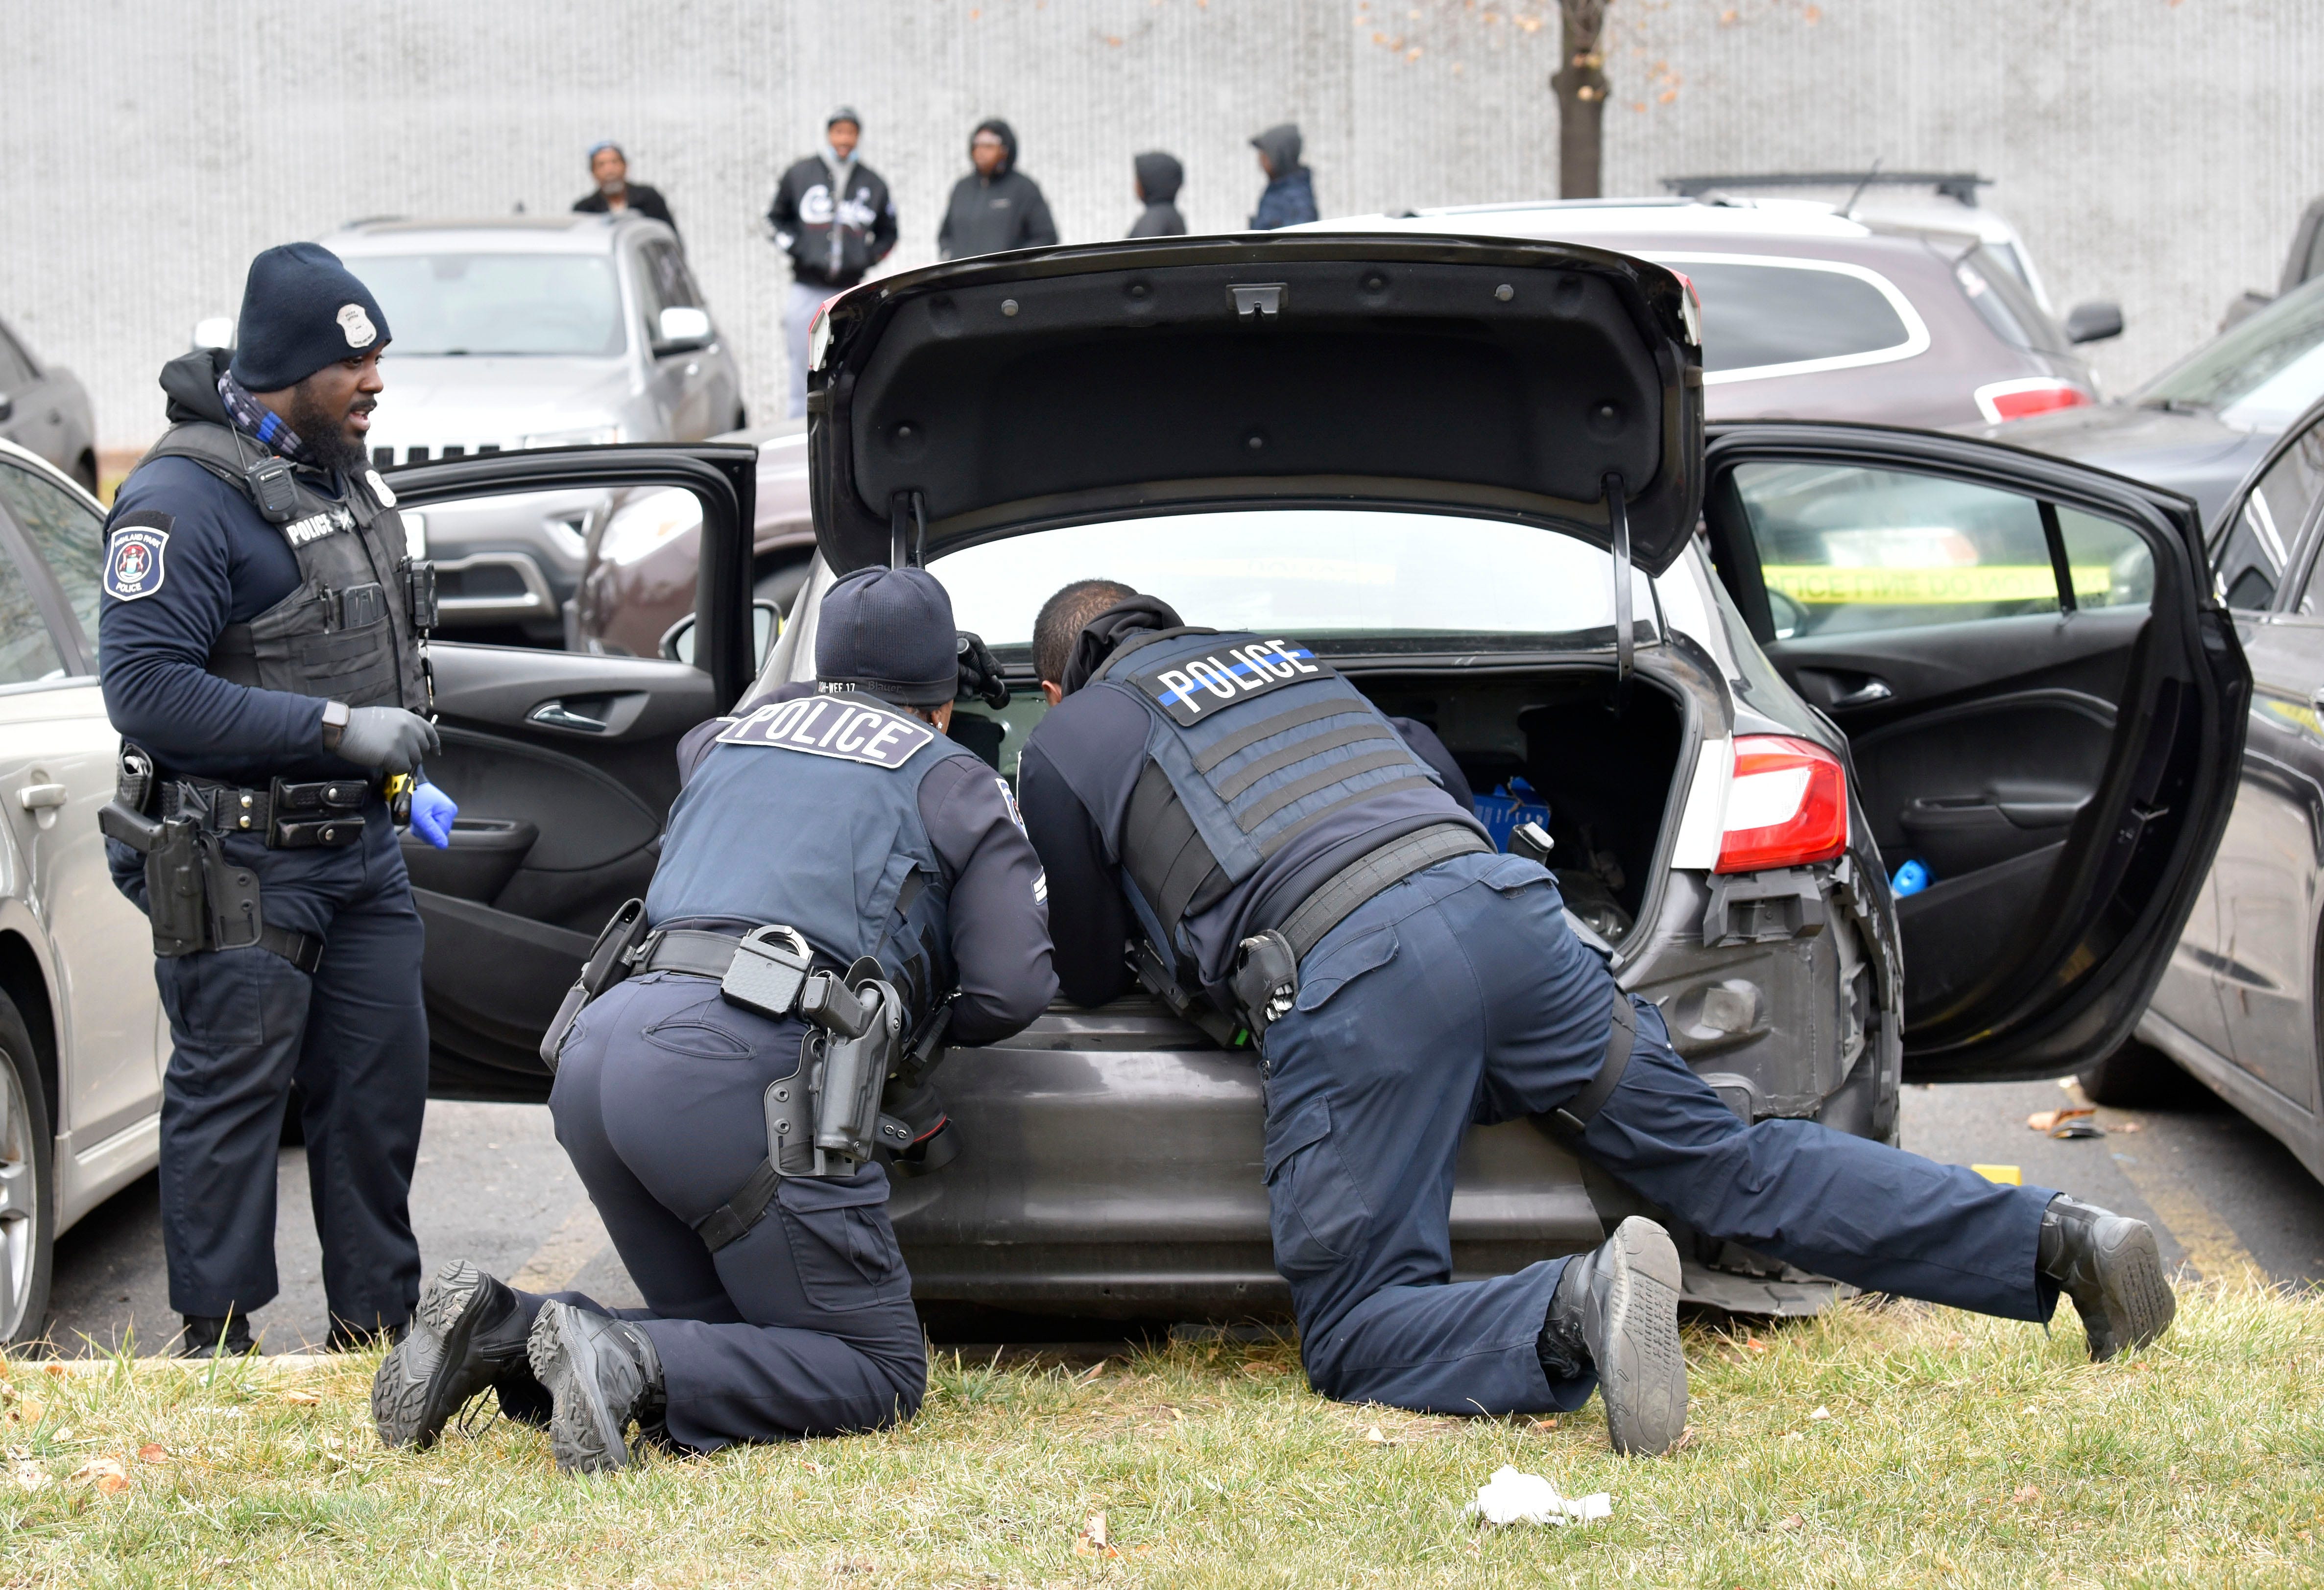 Highland Park police officers look in the trunk of this vehicle at the scene of the shooting, Wednesday afternoon, December 14, 2022.